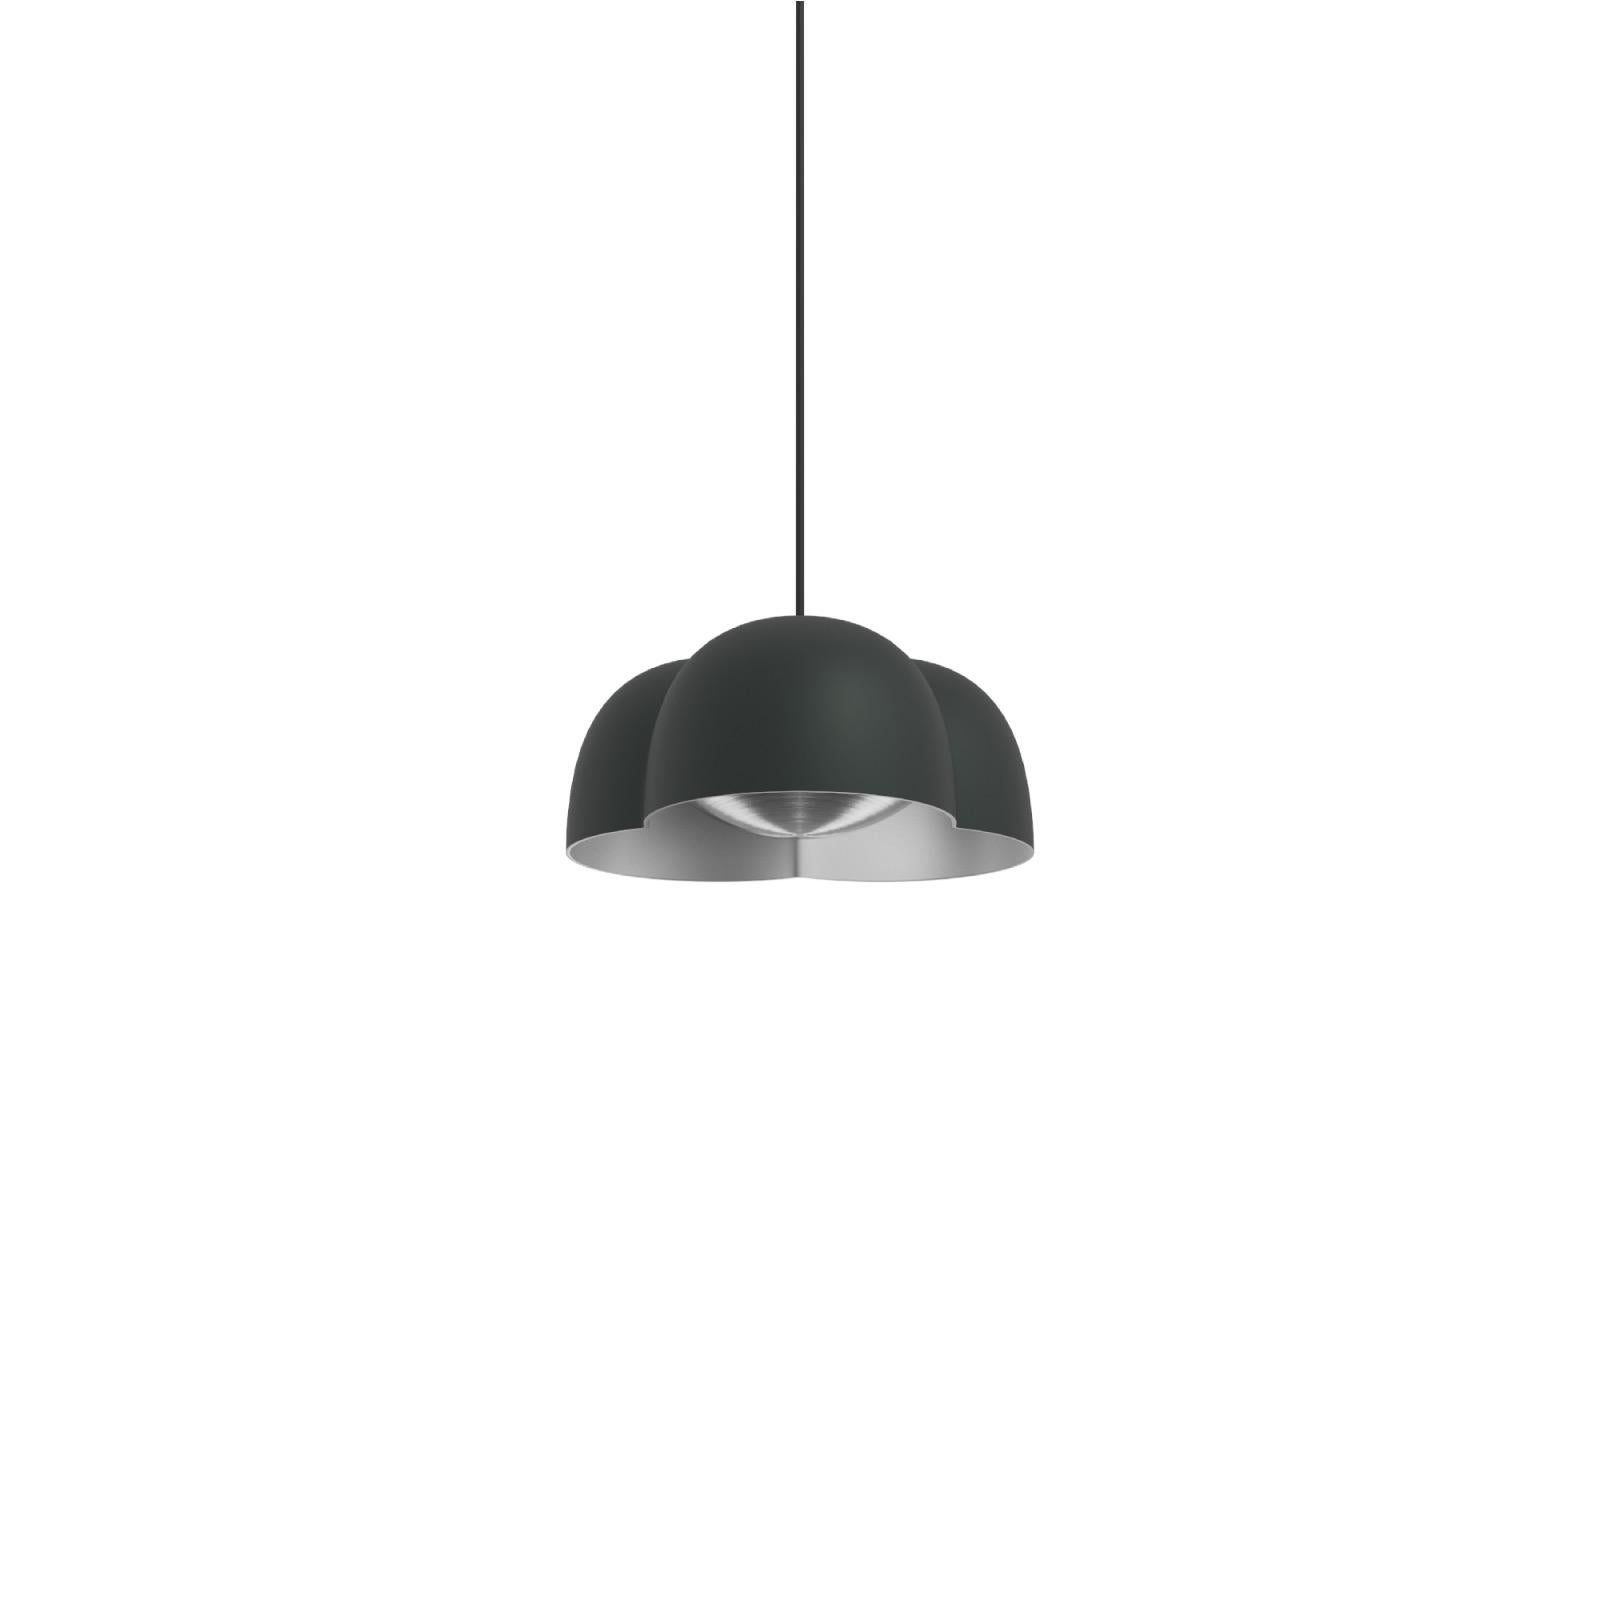 Cotton Pendant lamp by Sebastian Herkner x AGO Lighting
Small - Deep Green

Materials: Aluminum, Stainless 
Light Source: Integrated LED (SMD), DC
Watt. 4W
Color temp. 2700 / 3000K
Cable Length: 3m 

Available colors:
Charcoal, chocolate,